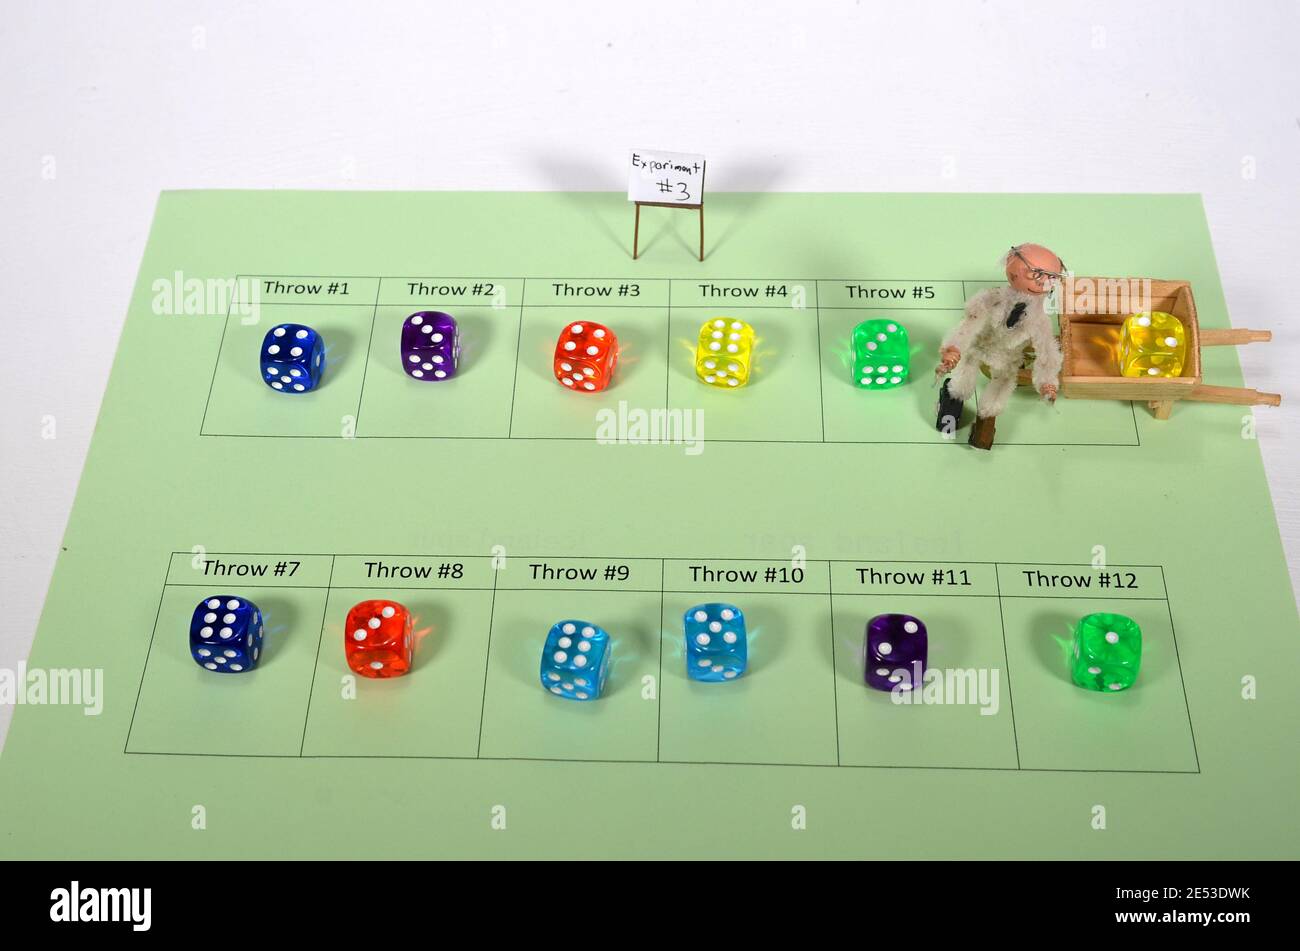 Stochastic experiment with 12randomly thrown dices arranged in a scheme. Stock Photo